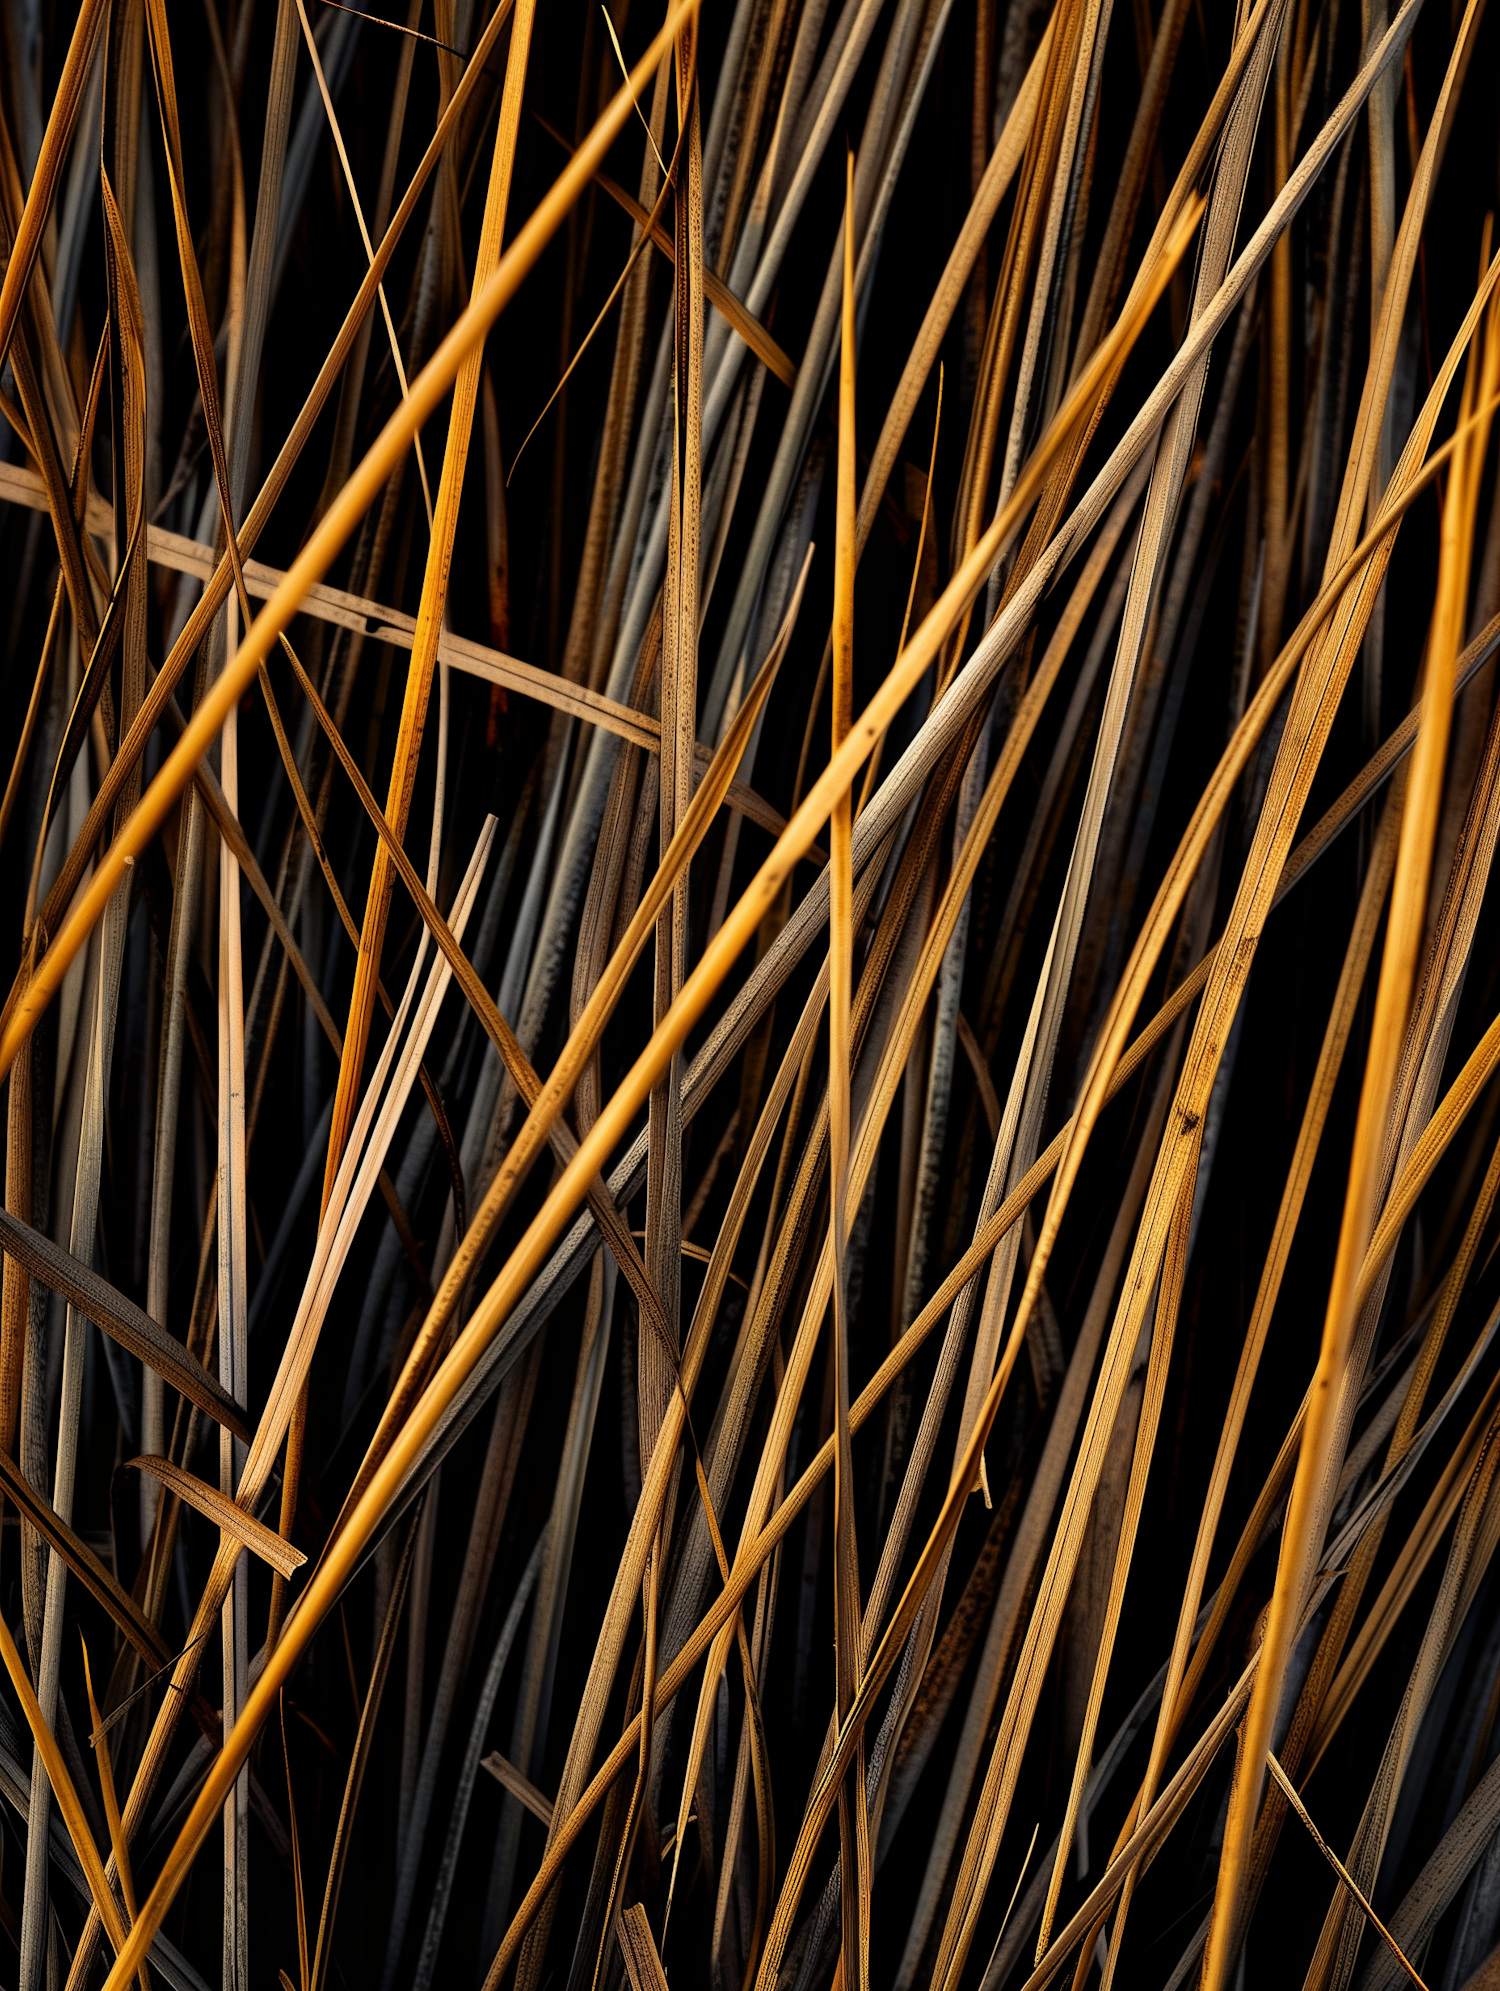 Intricate Weave of Autumn Reeds